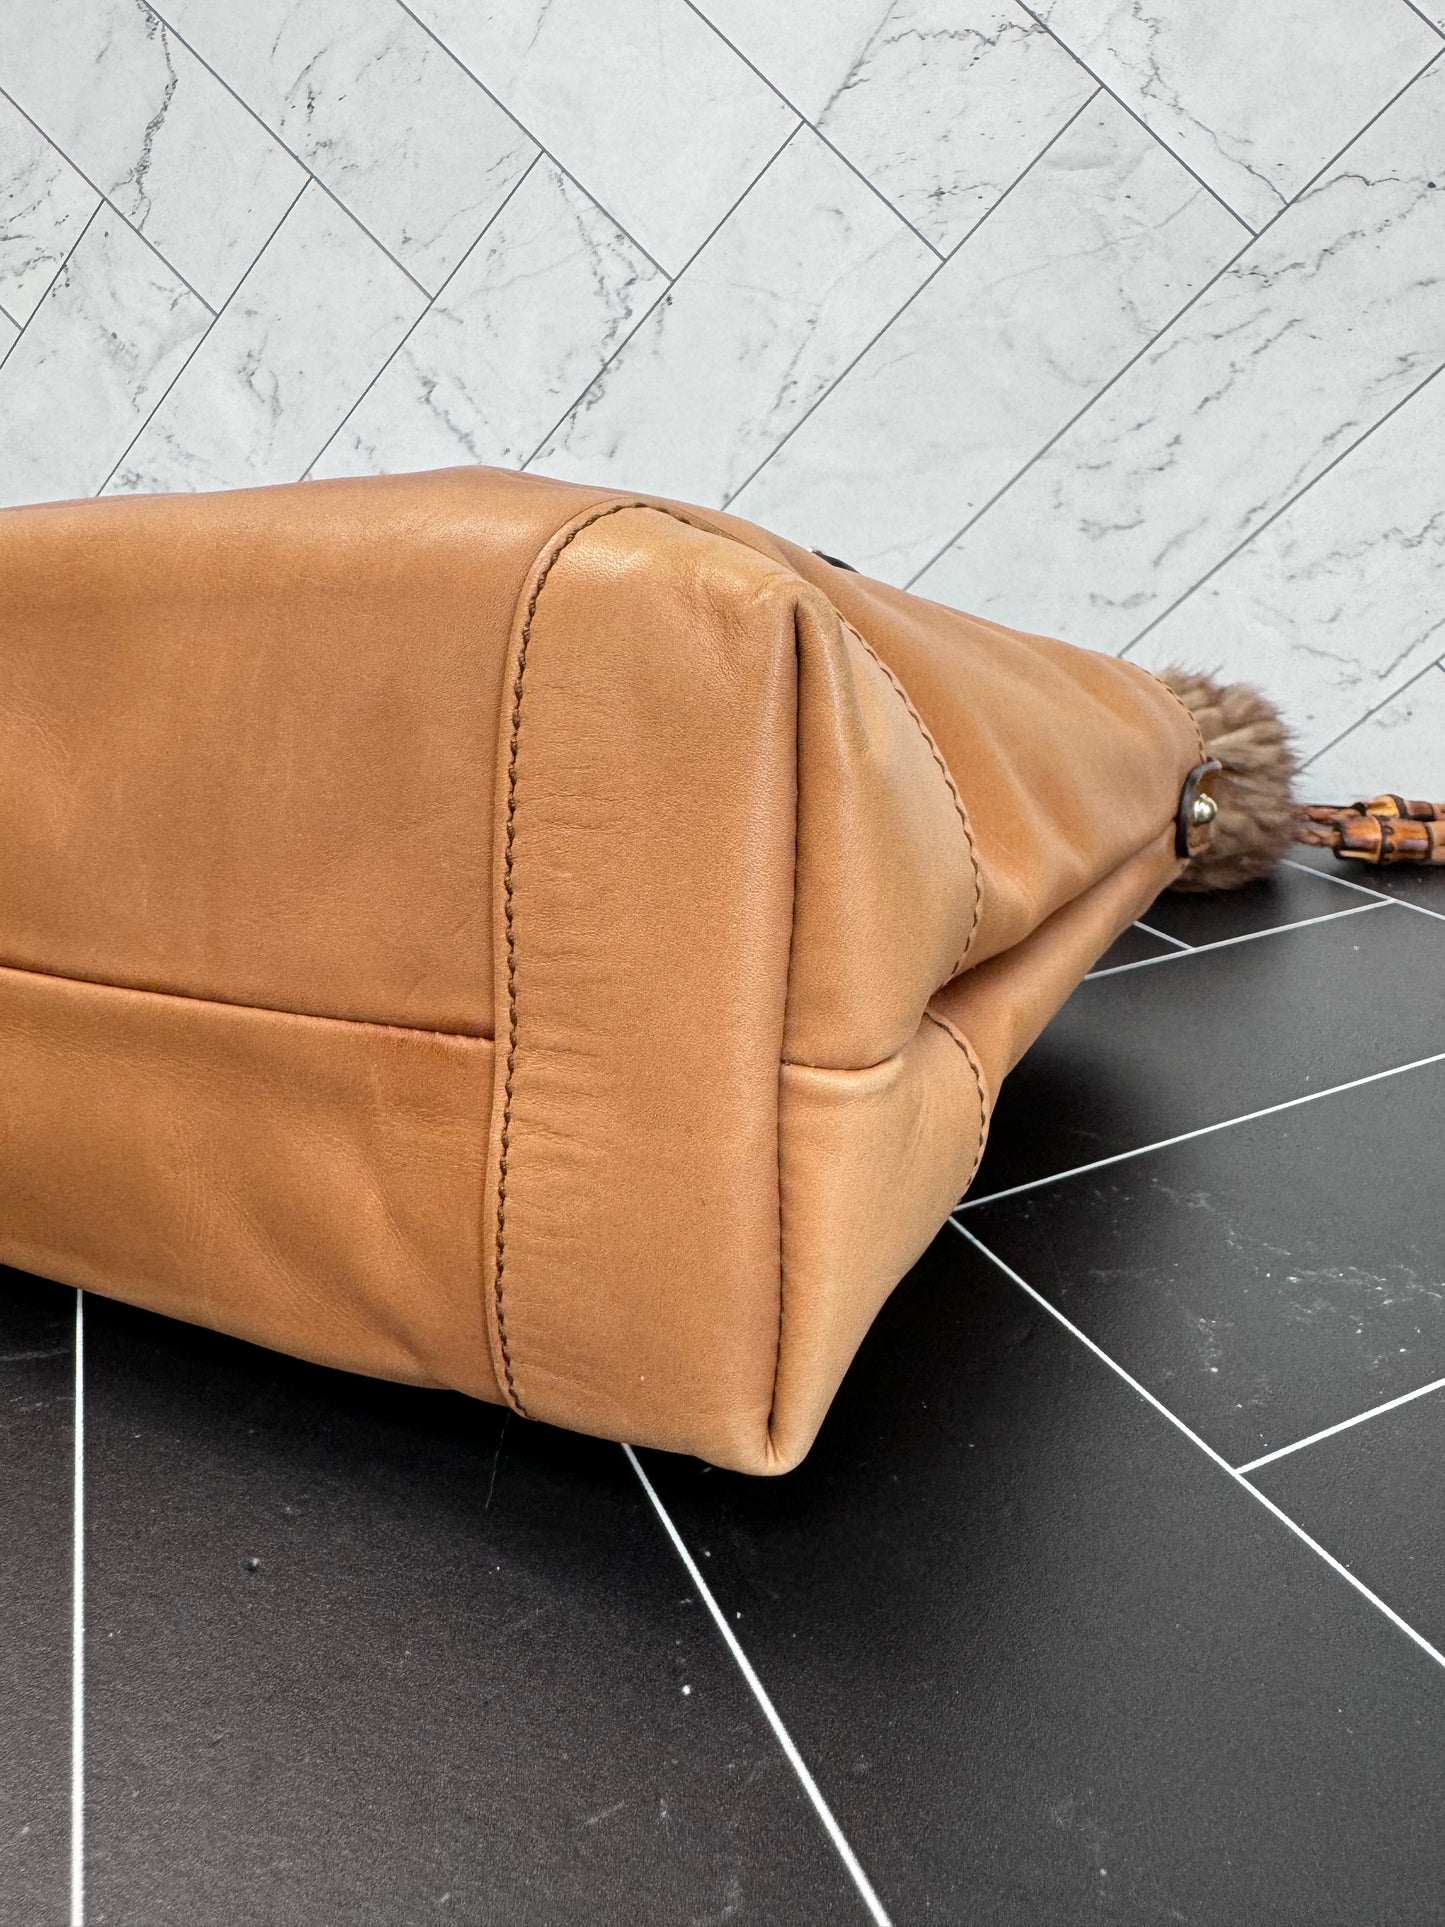 Gucci Tan Leather Craft Bag with Fur Pouch